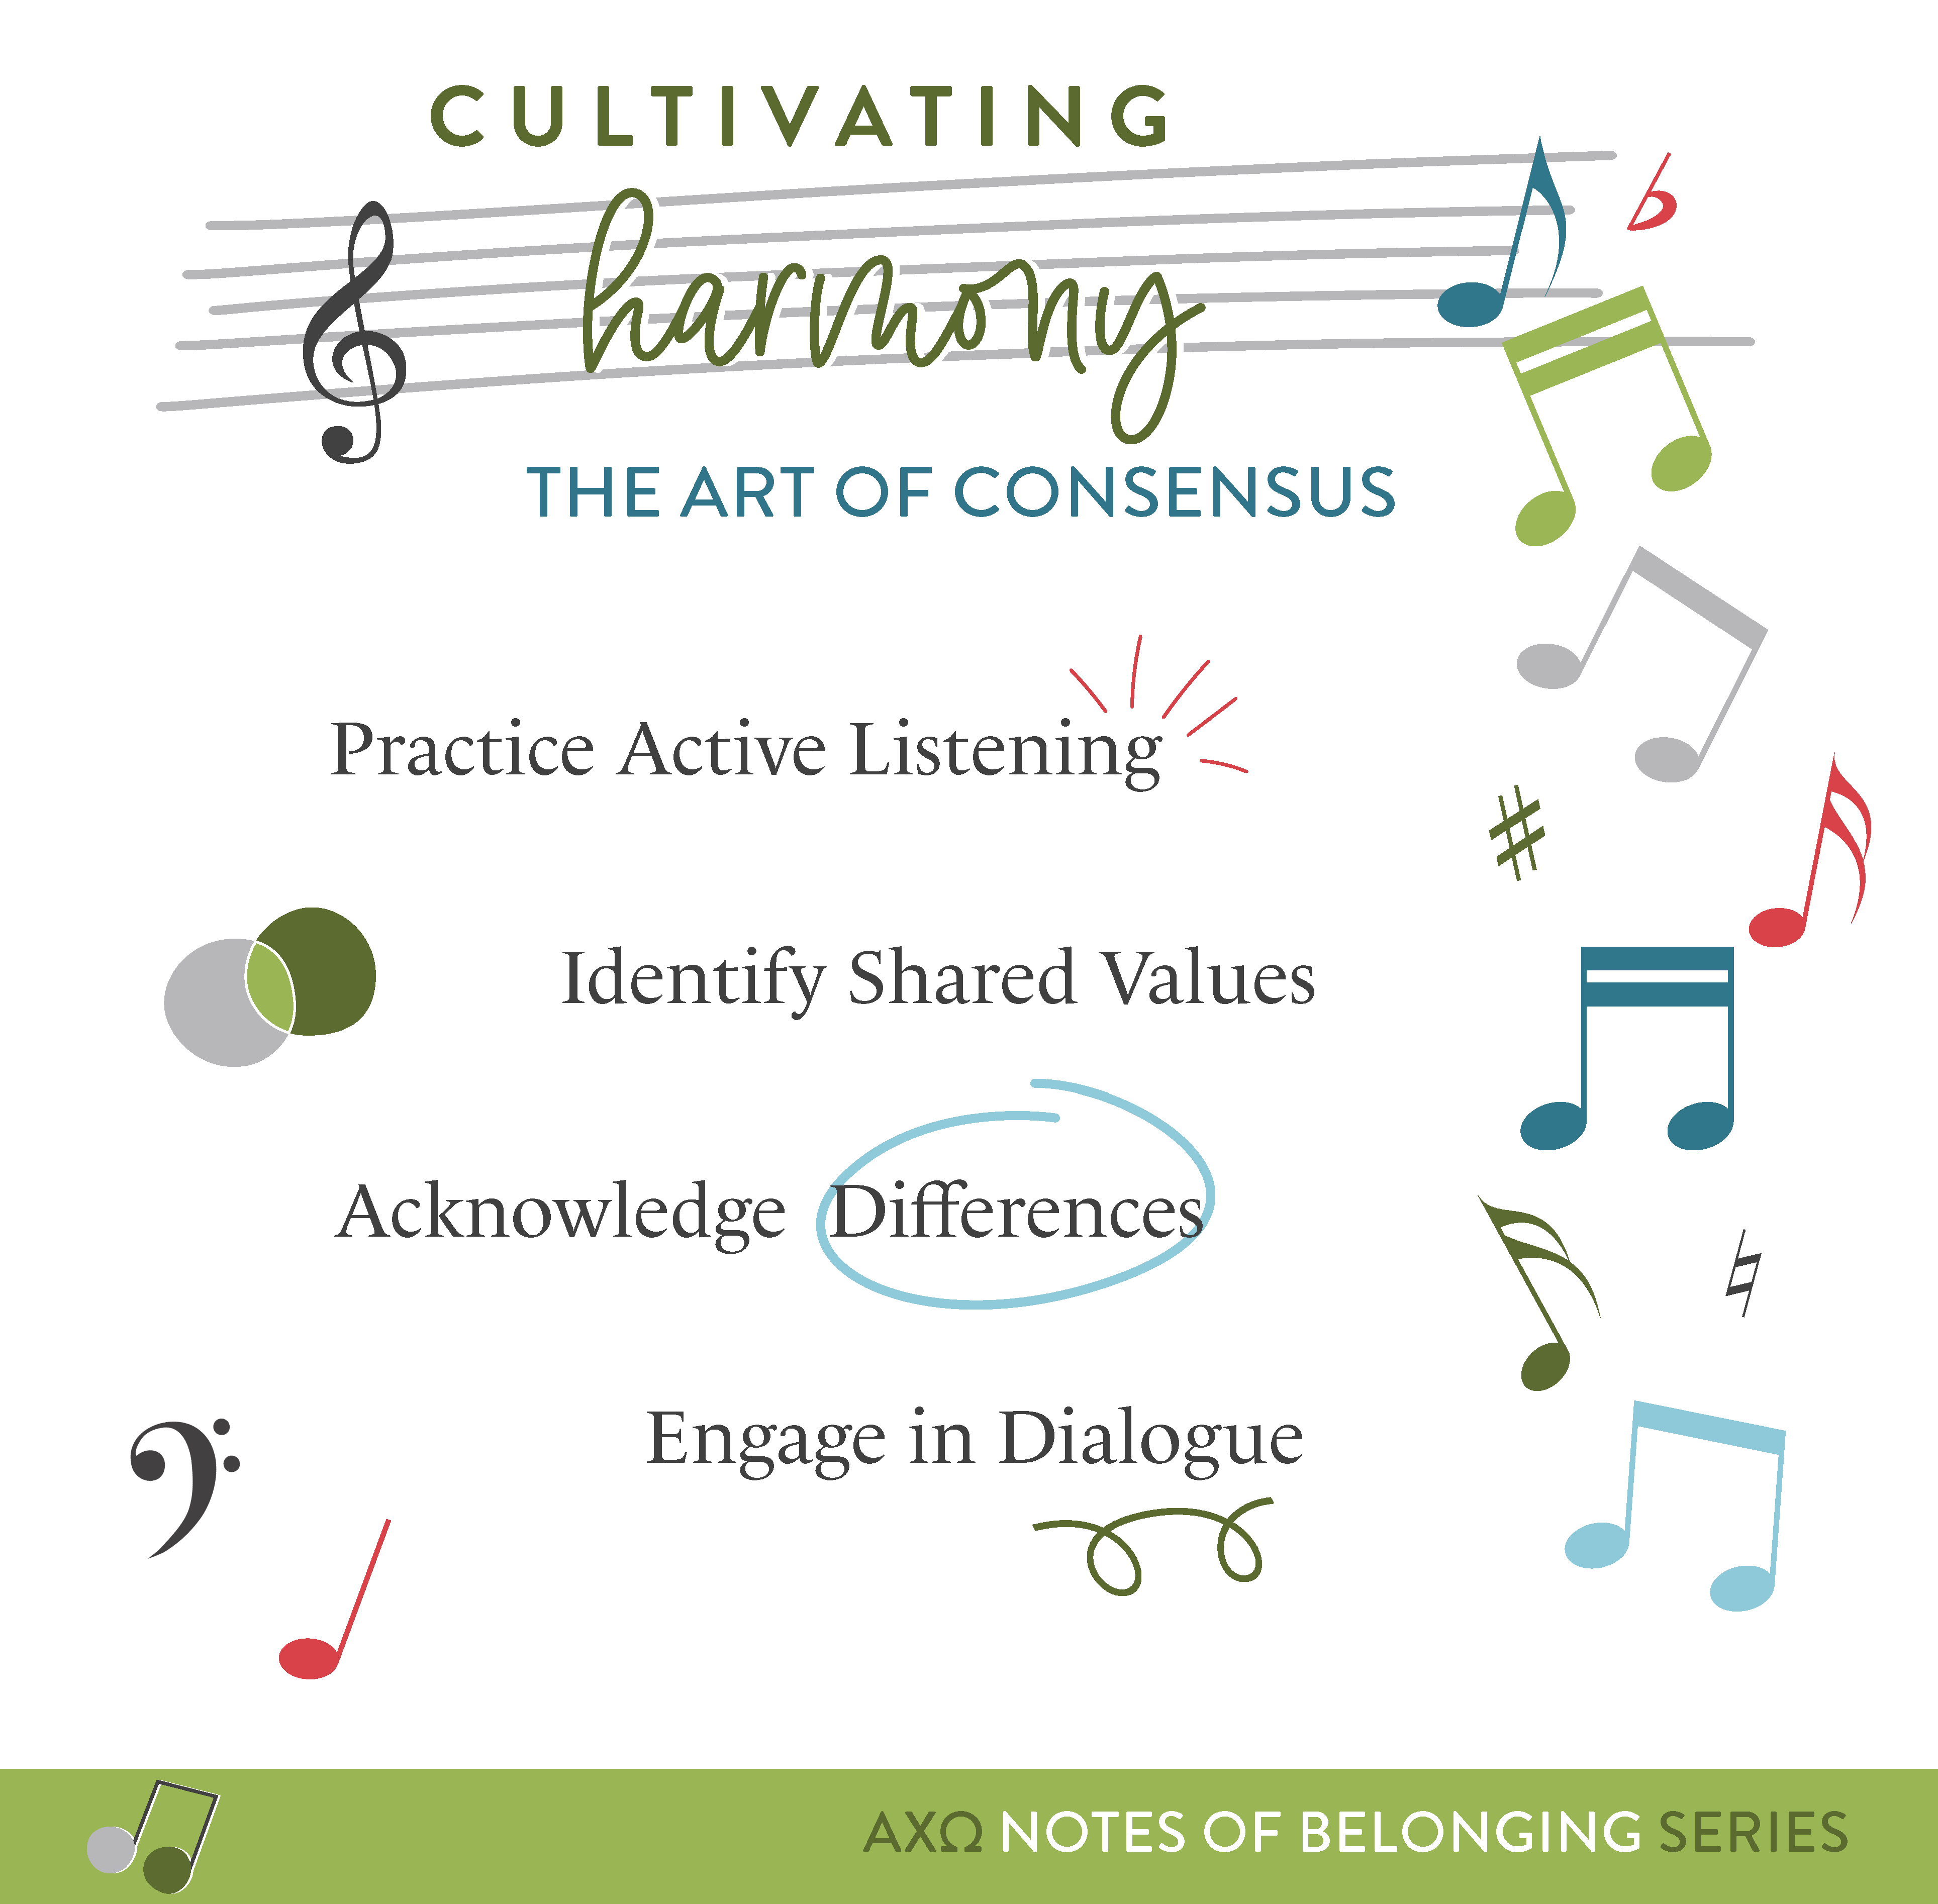 Cultivating Harmony: The Art of Consensus; Practice Active Listening, Identify Shared Values, Acknowledge Differences, Engage in Dialogue